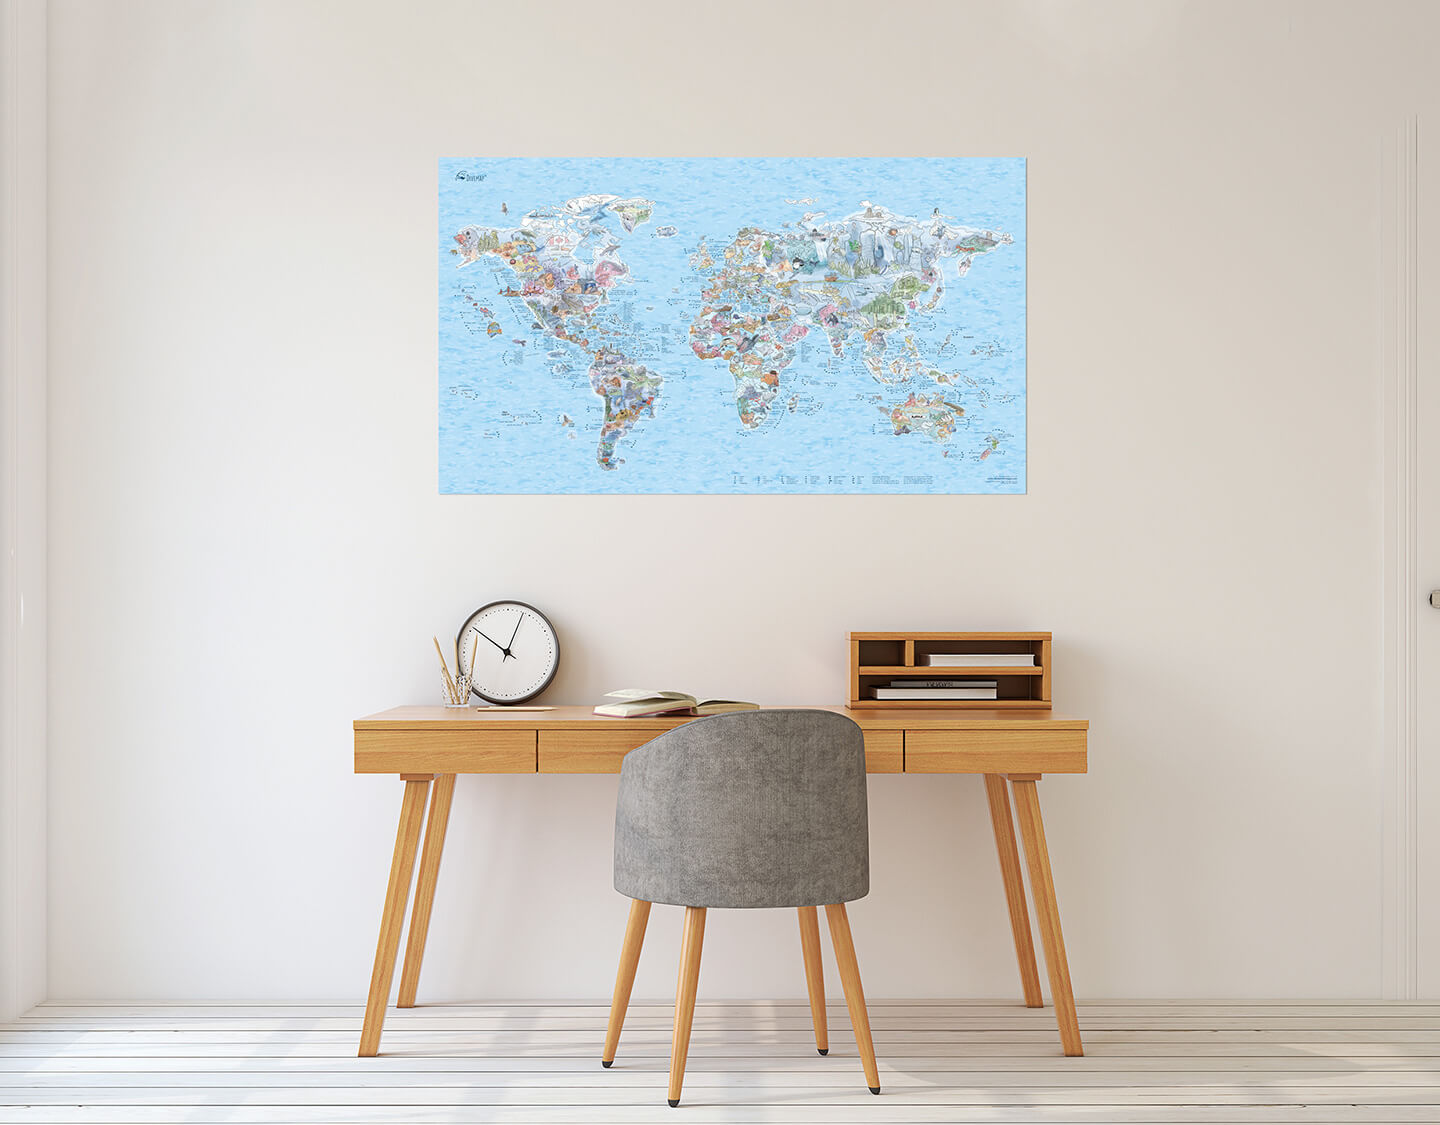 Awesome Maps - Dive Map Poster [97.5x56cm]